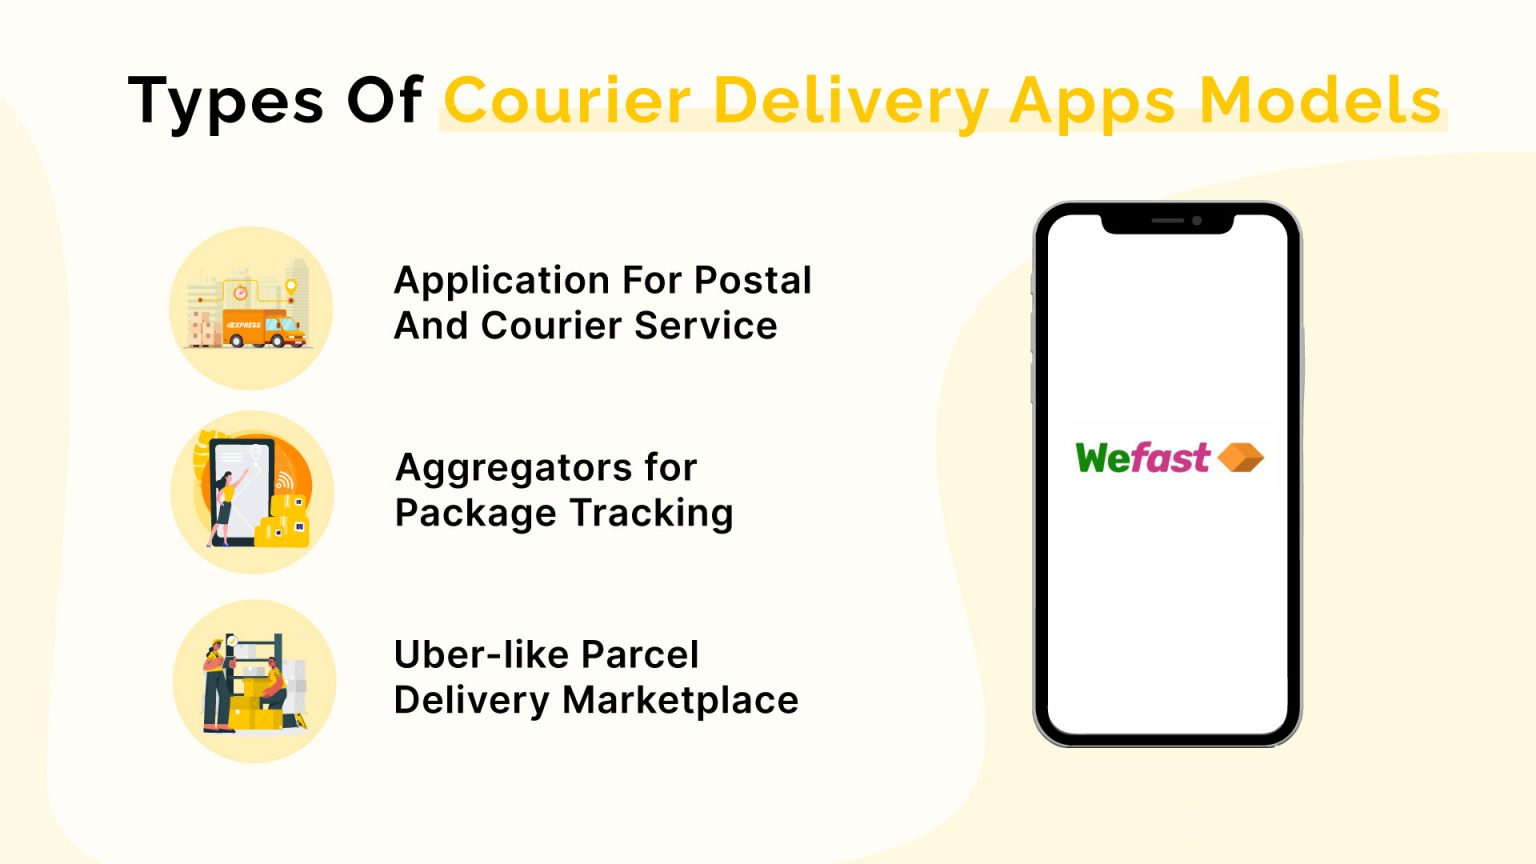 On-demand Courier Delivery Apps